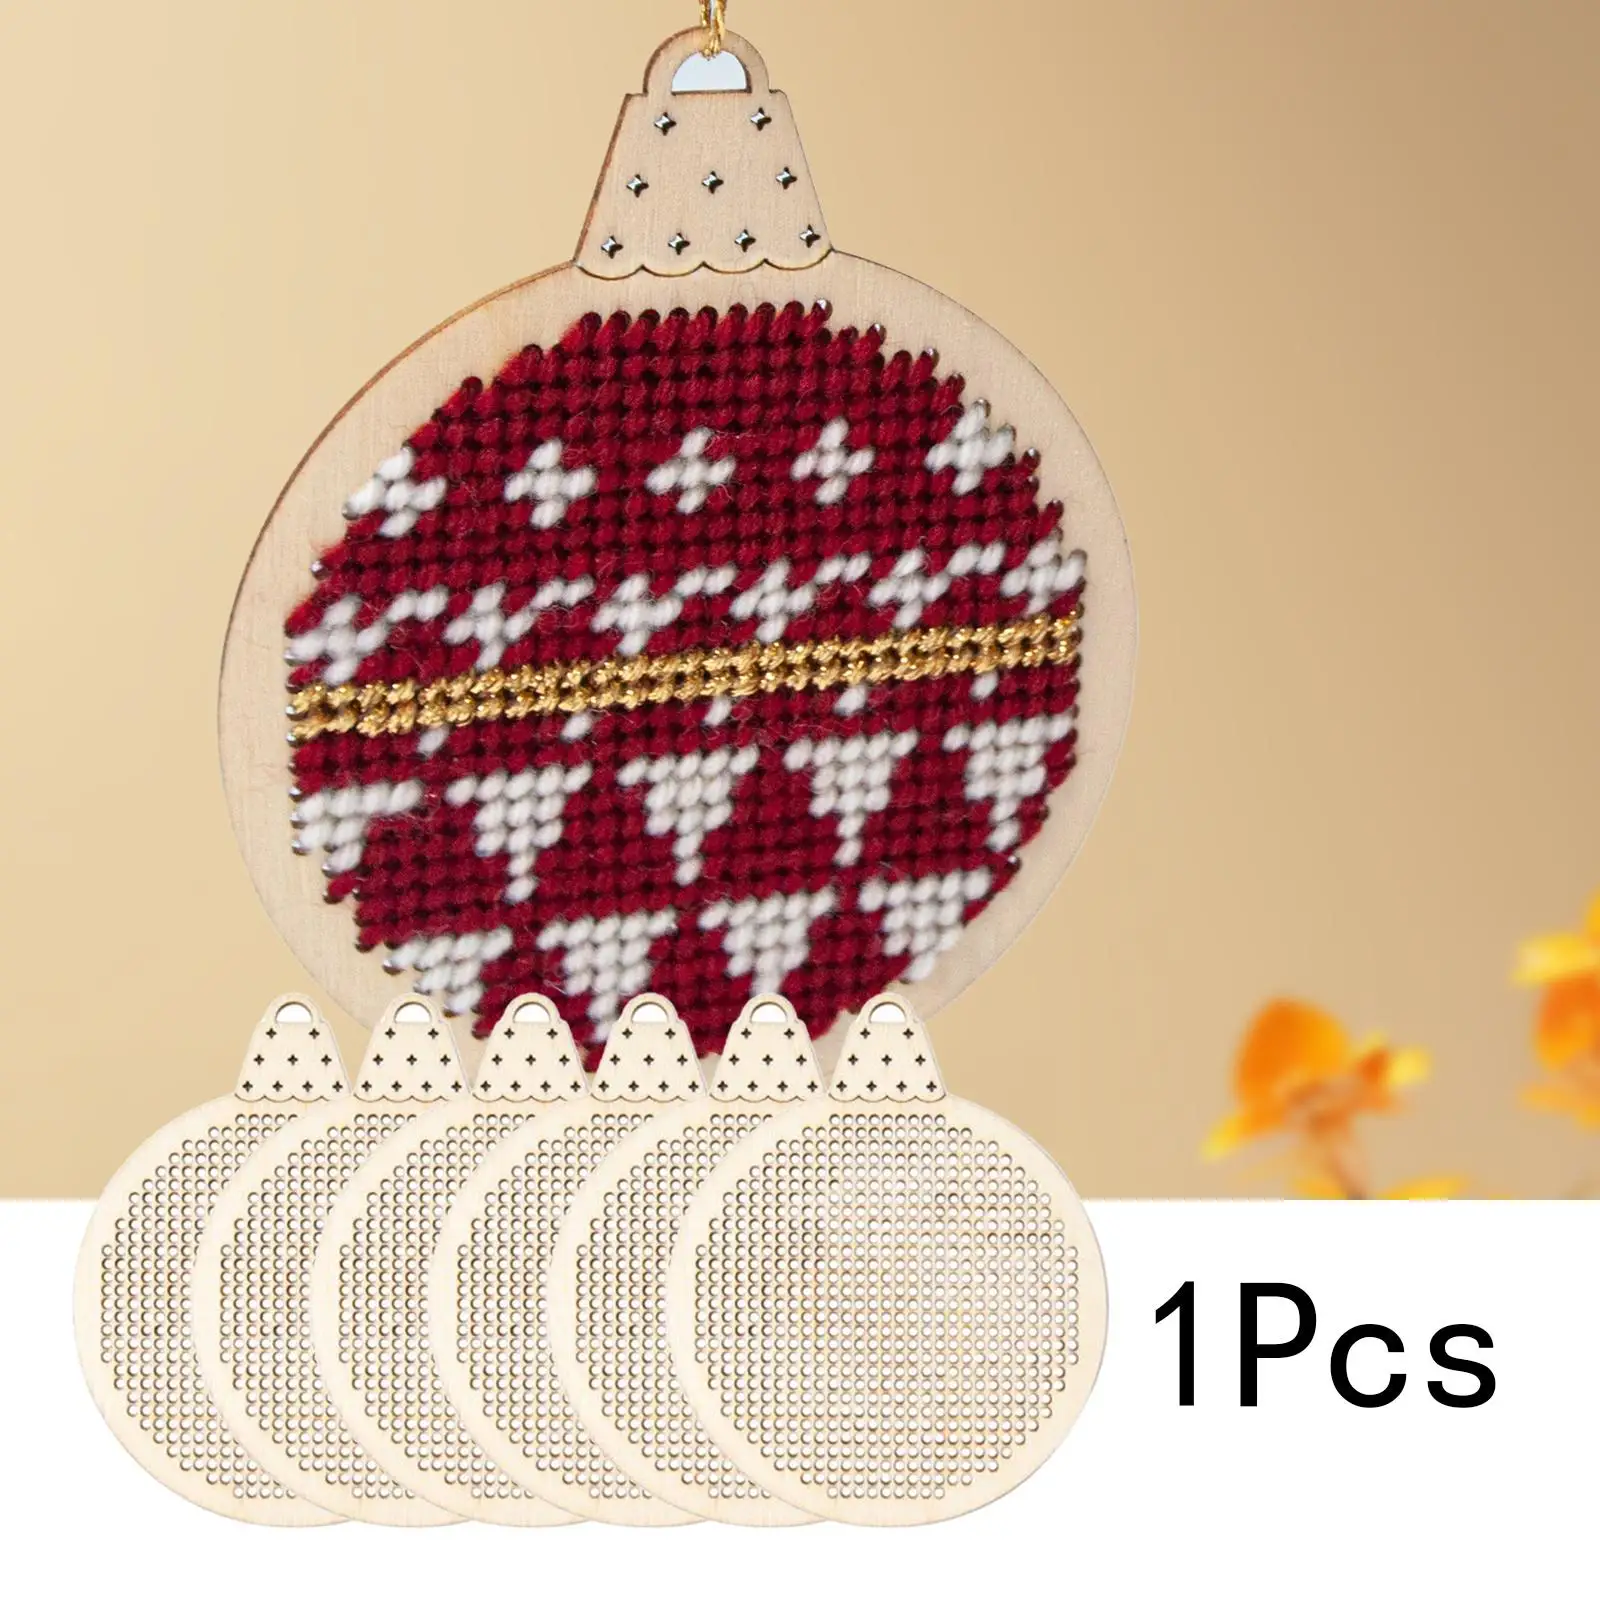 6 Pieces Wood Slices DIY Handmade Crafts for Christmas Party Decoration